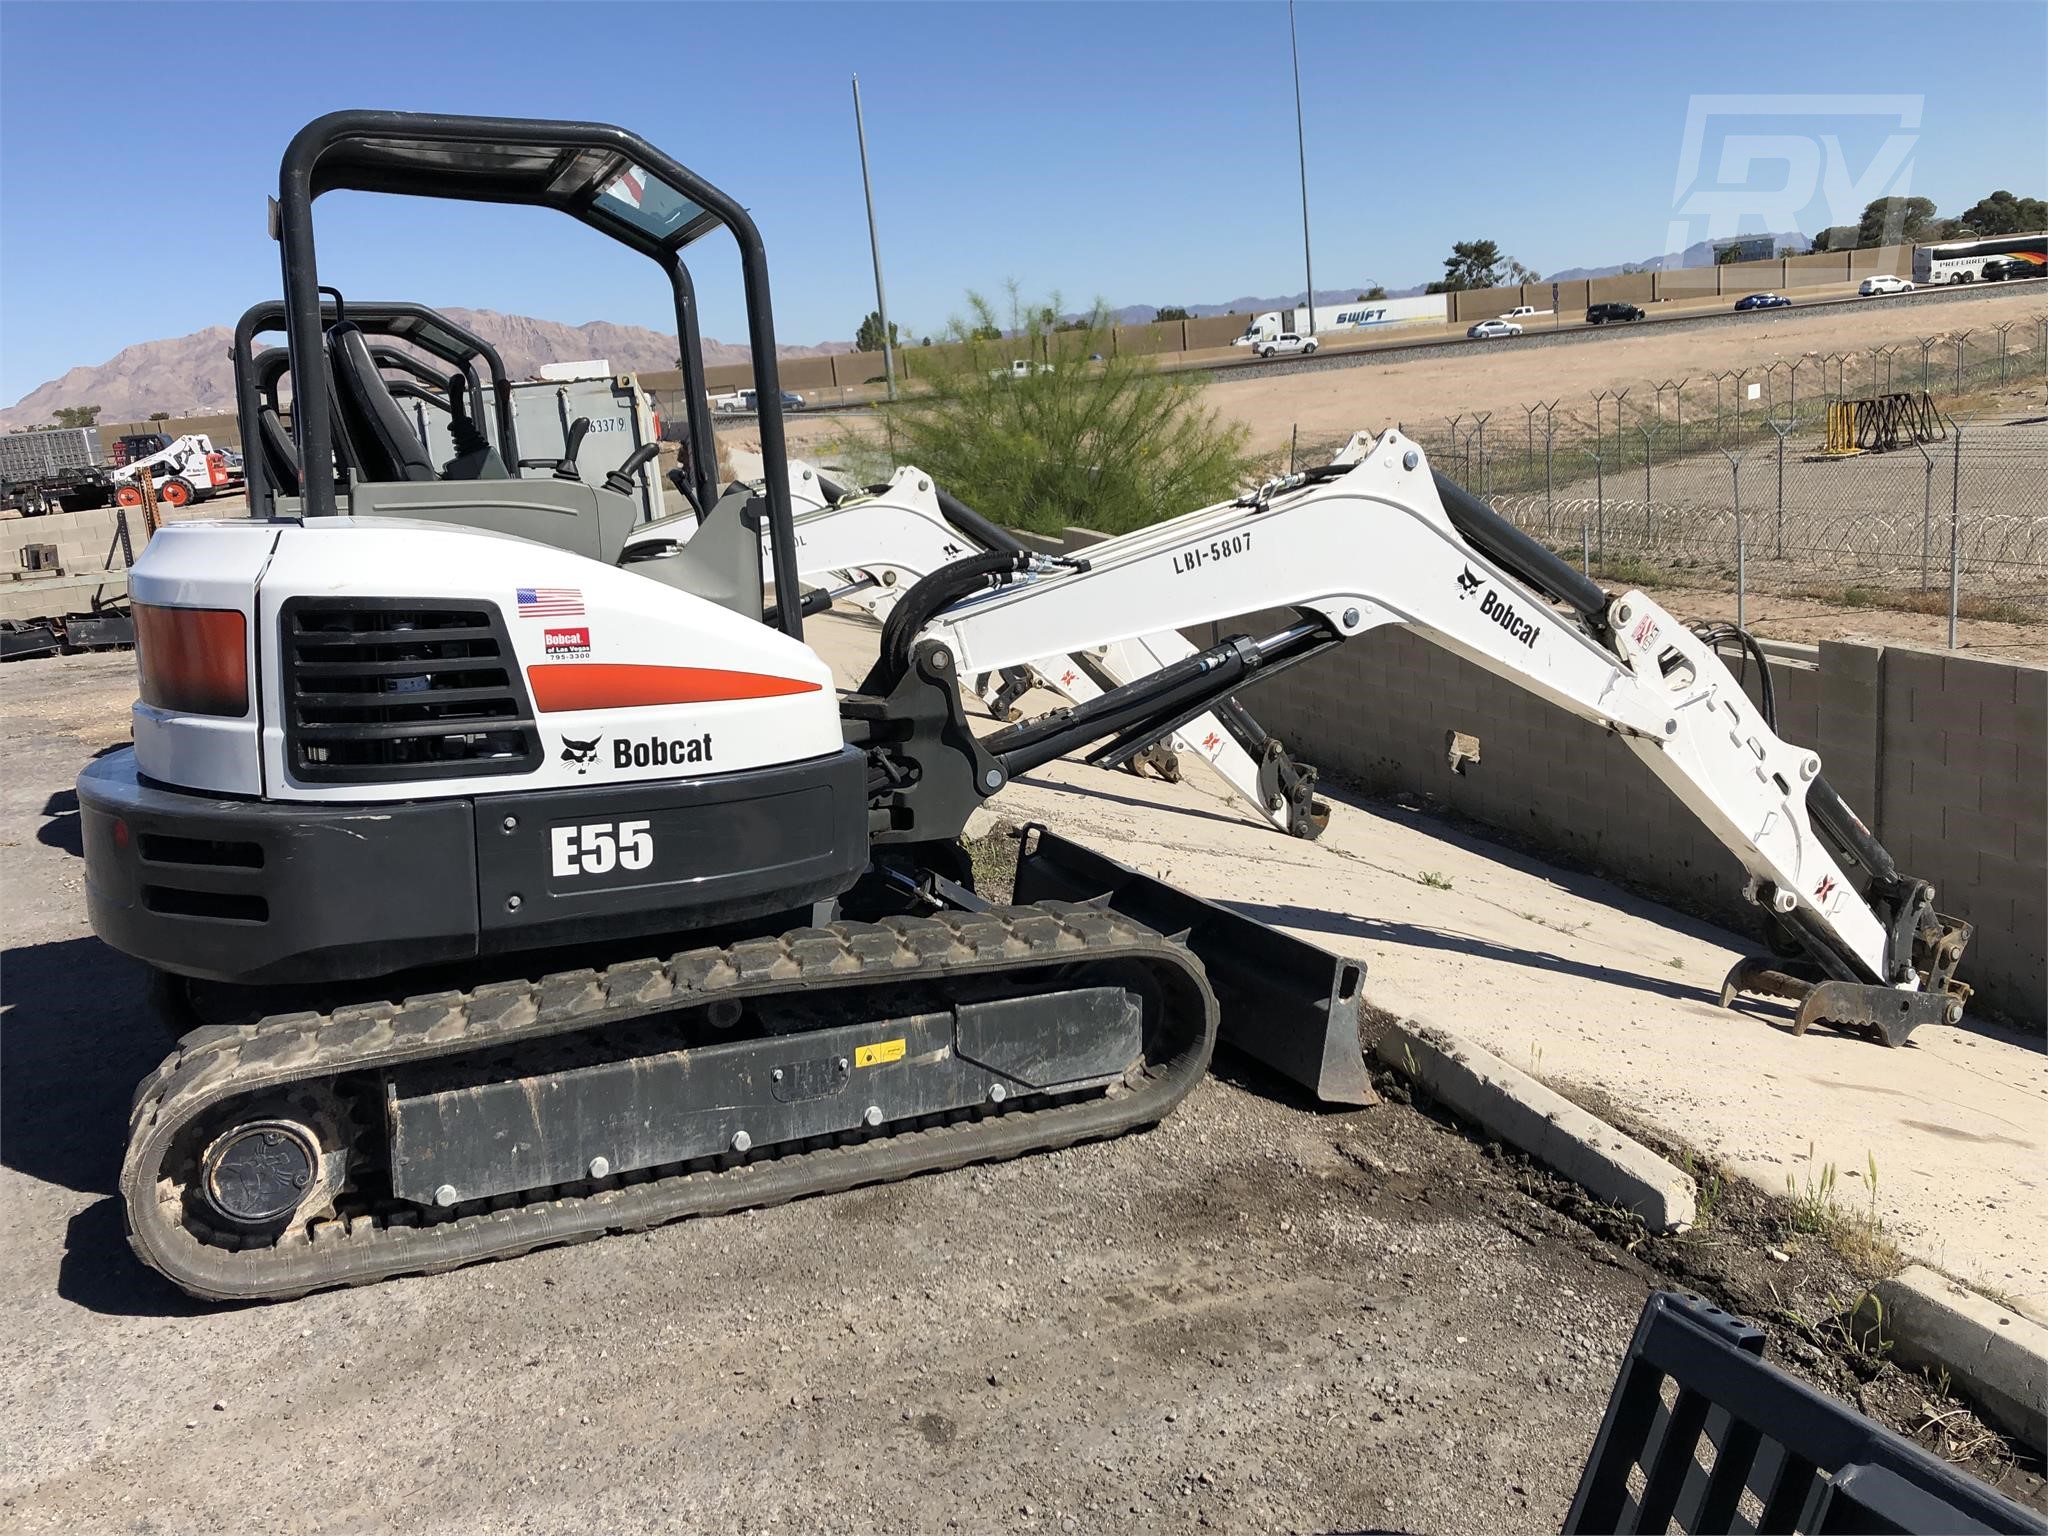 Bobcat Of Las Vegas Construction Equipment For Rent 26 Listings Rentalyard Com Page 1 Of 2